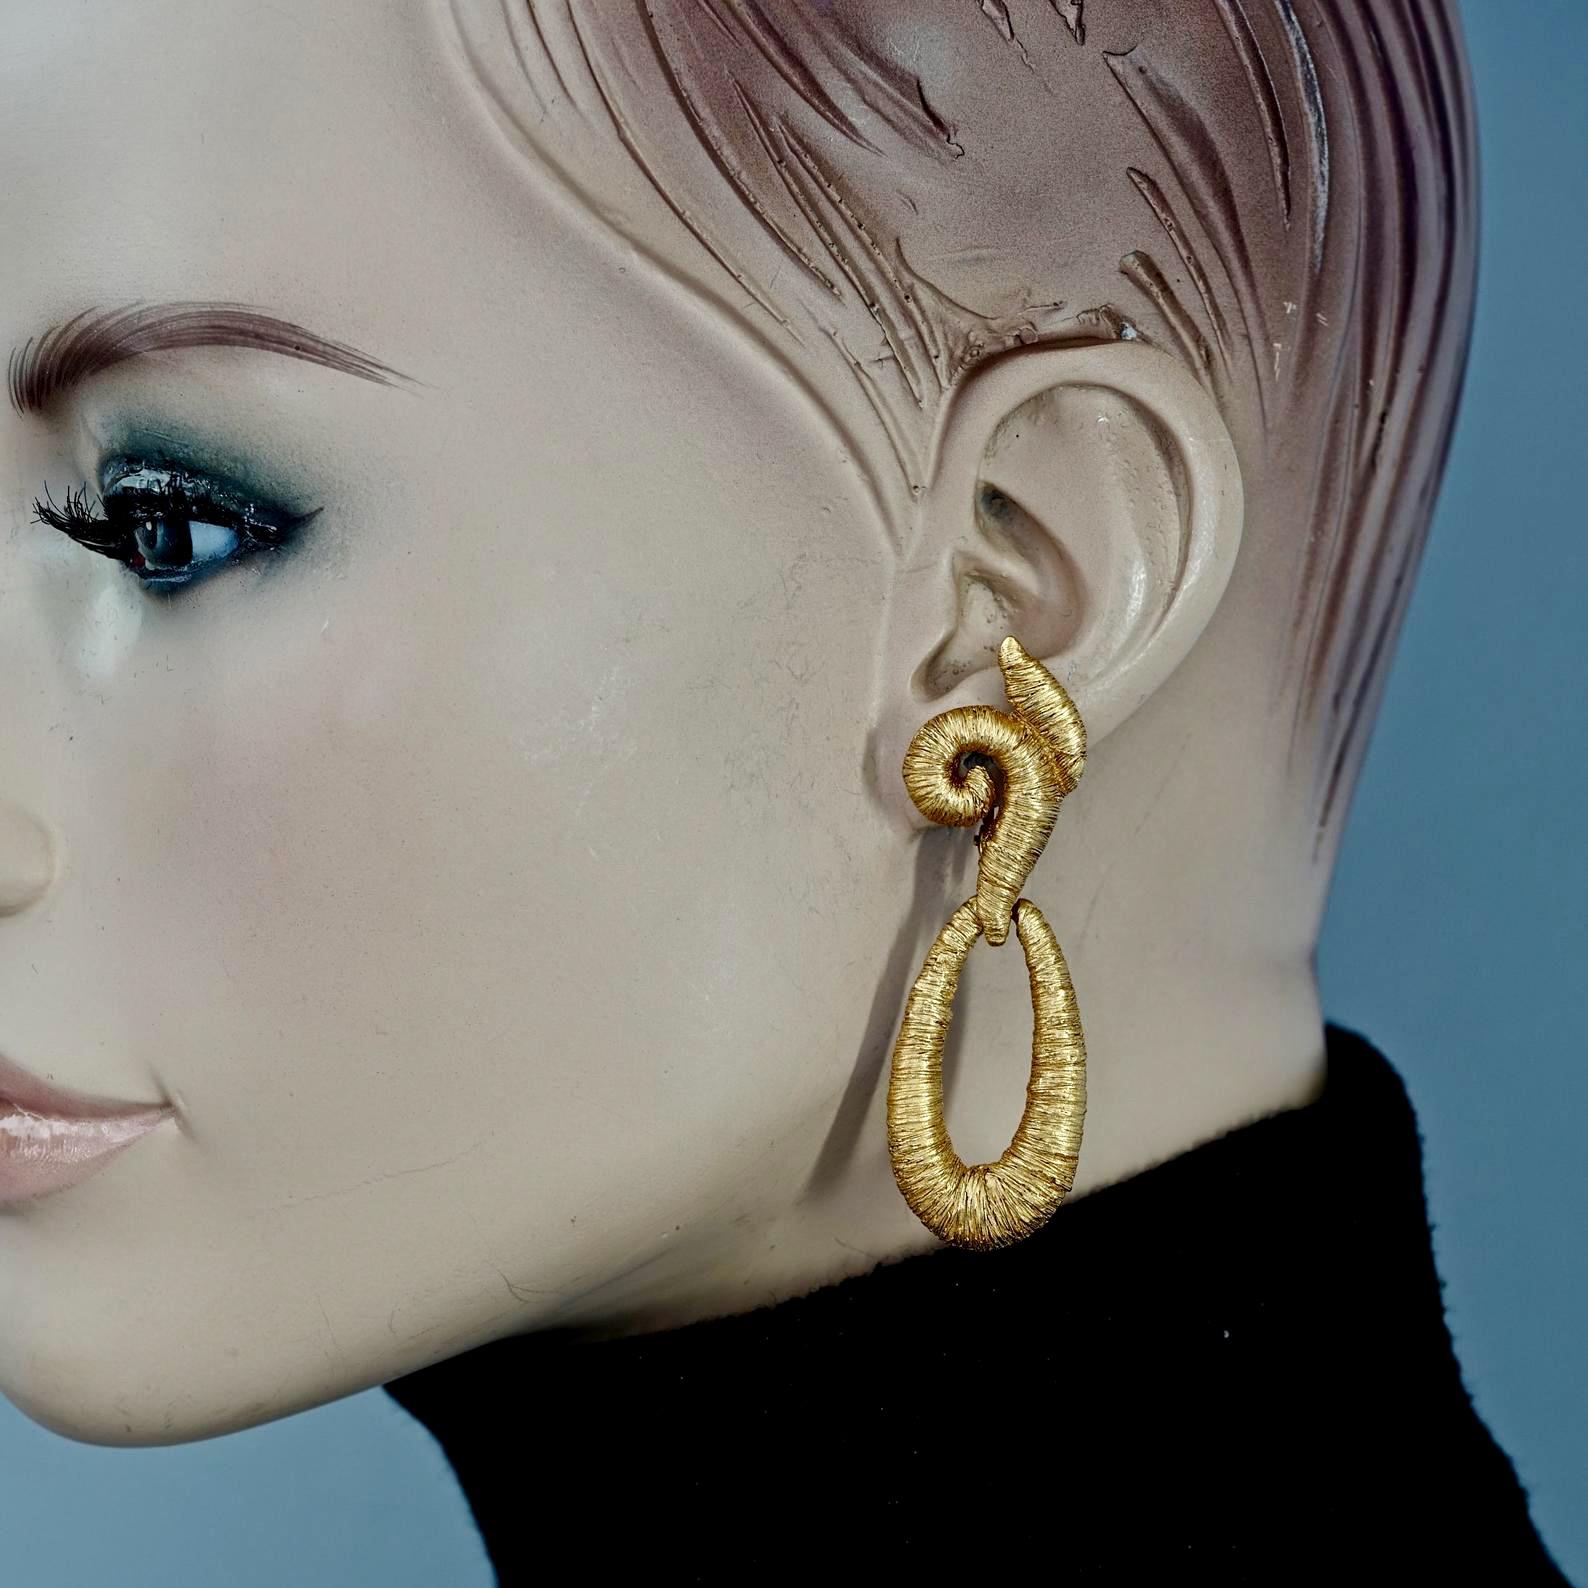 Vintage BALENCIAGA Wire Wrap Stylized Earrings

Measurements:
Height: 2.56 inches (6.5 cm)
Width: 0.83 inch (2.1 cm)
Weight per Earring: 15 grams

Features:
- 100% Authentic BALENCIAGA.
- Structured earrings with wire wrapped illusion.
- Gold